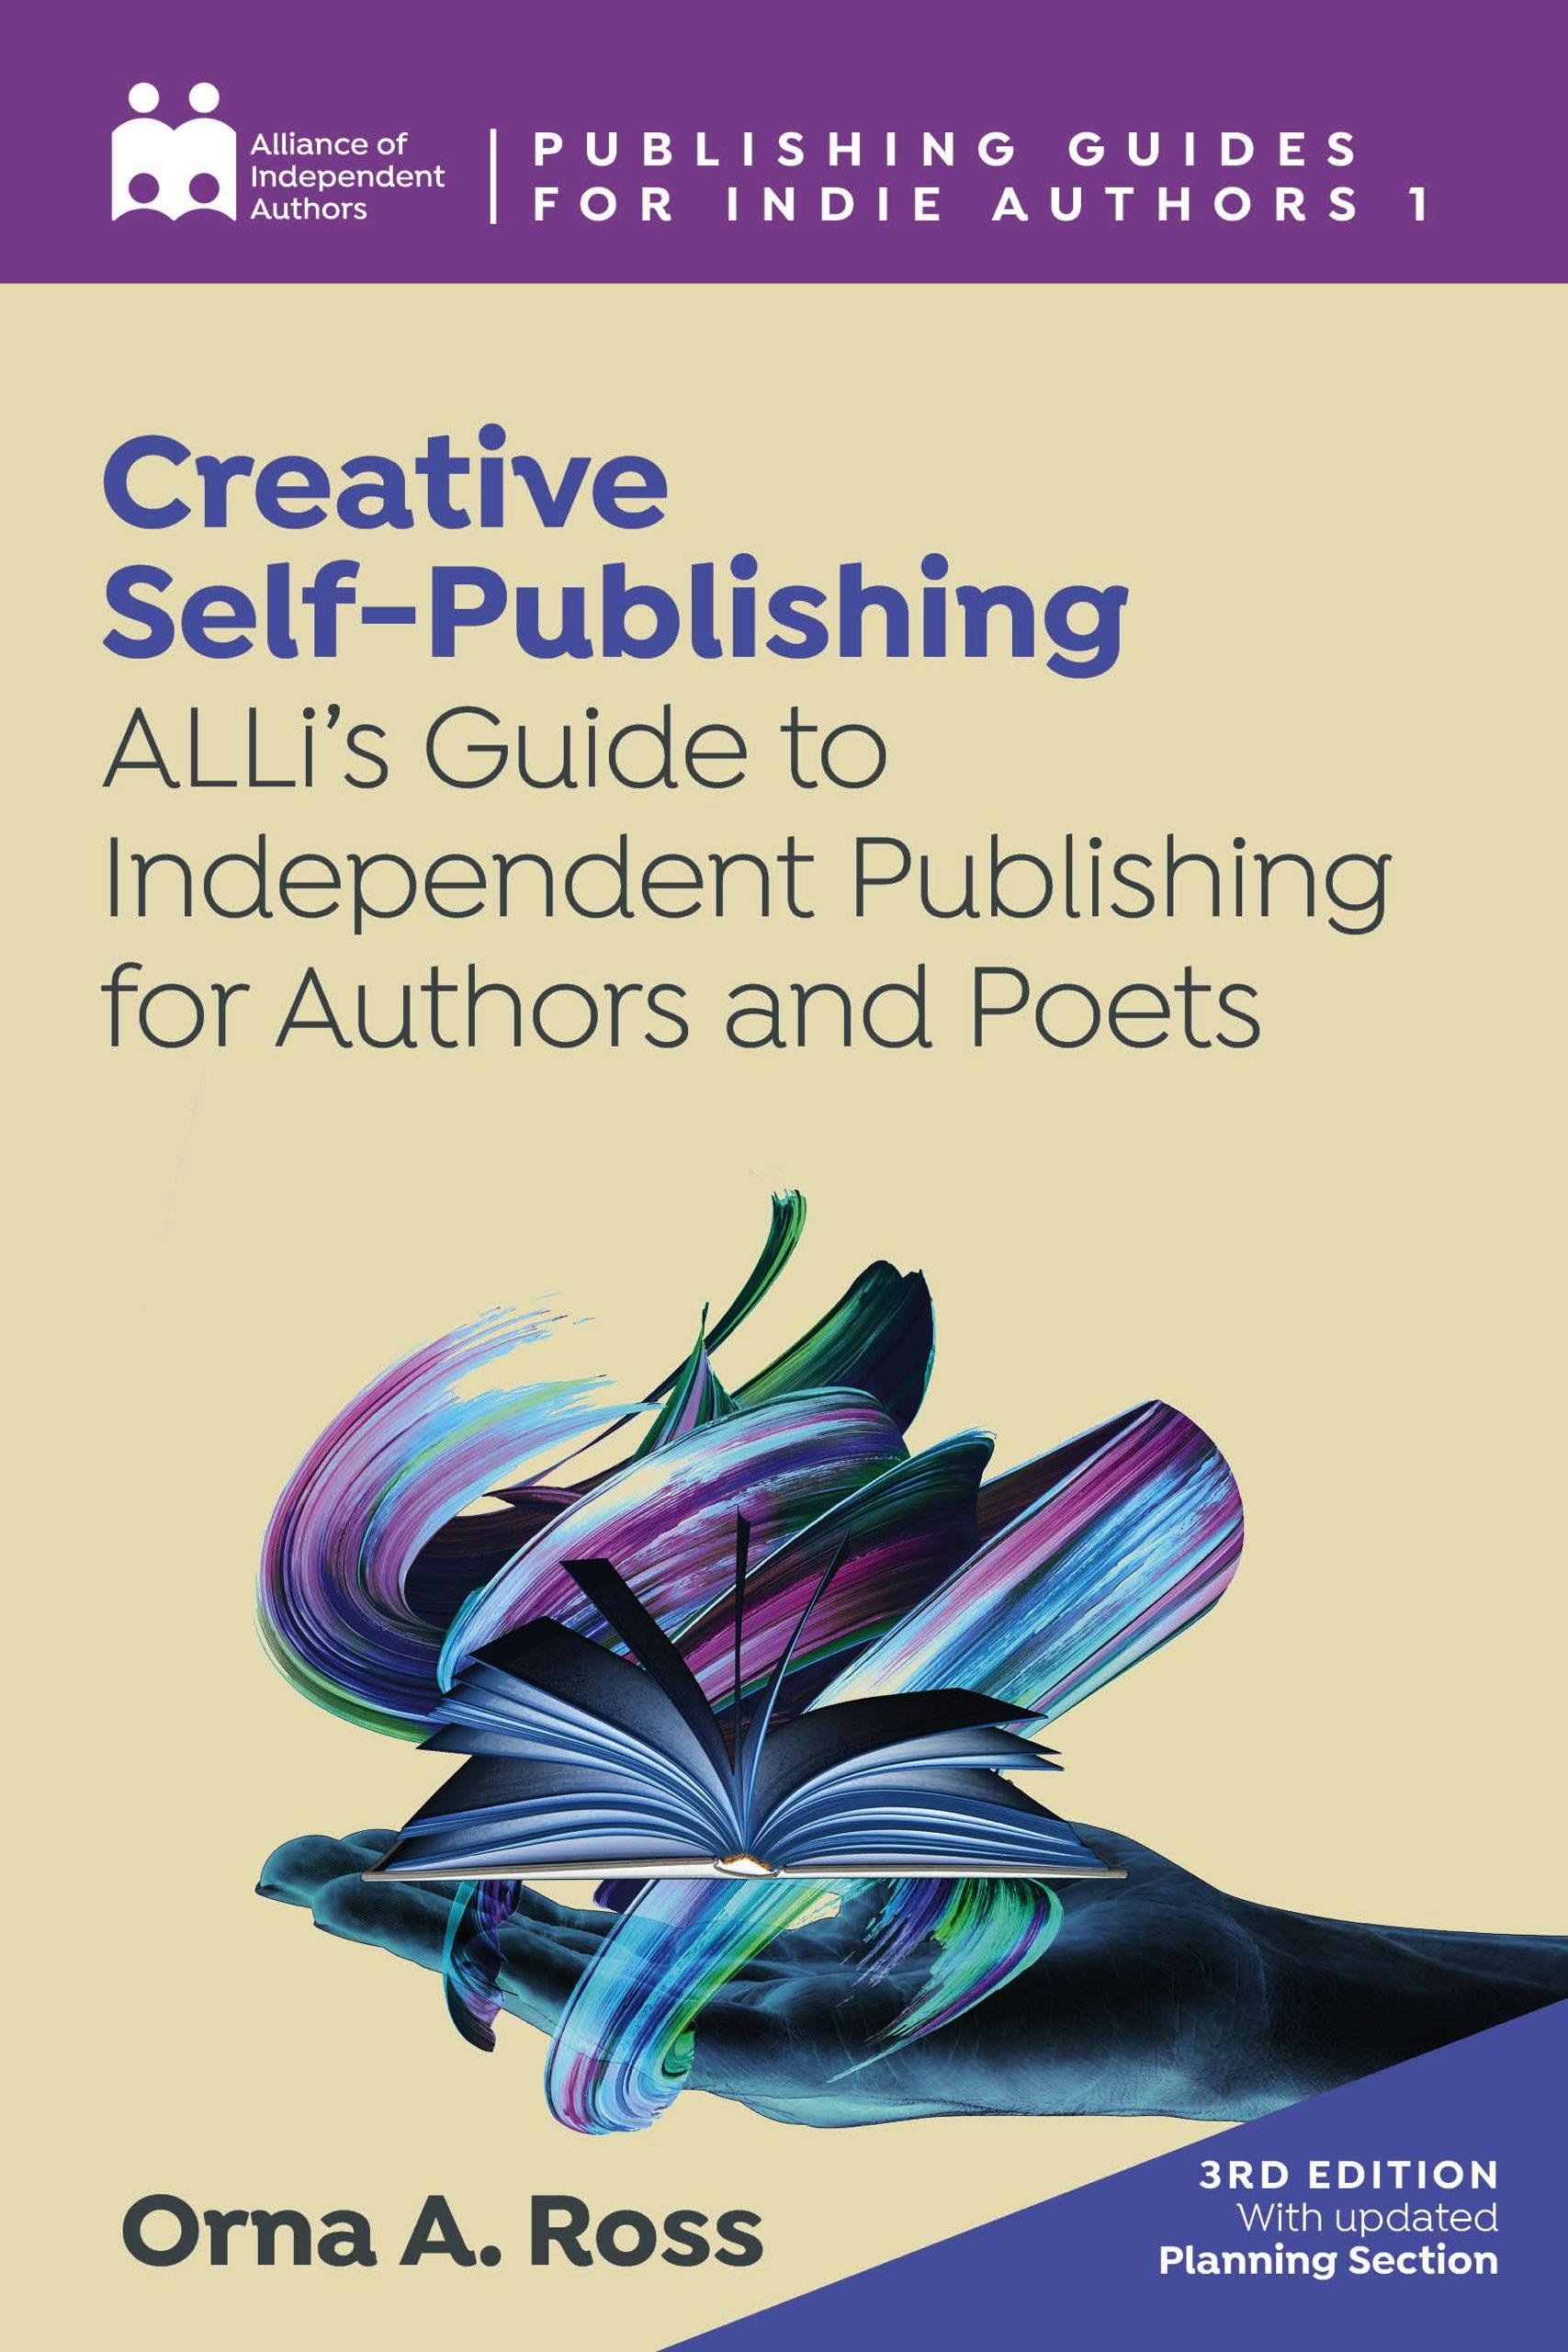 Creative Self-Publishing - Alliance of Independent Authors, Orna A. Ross